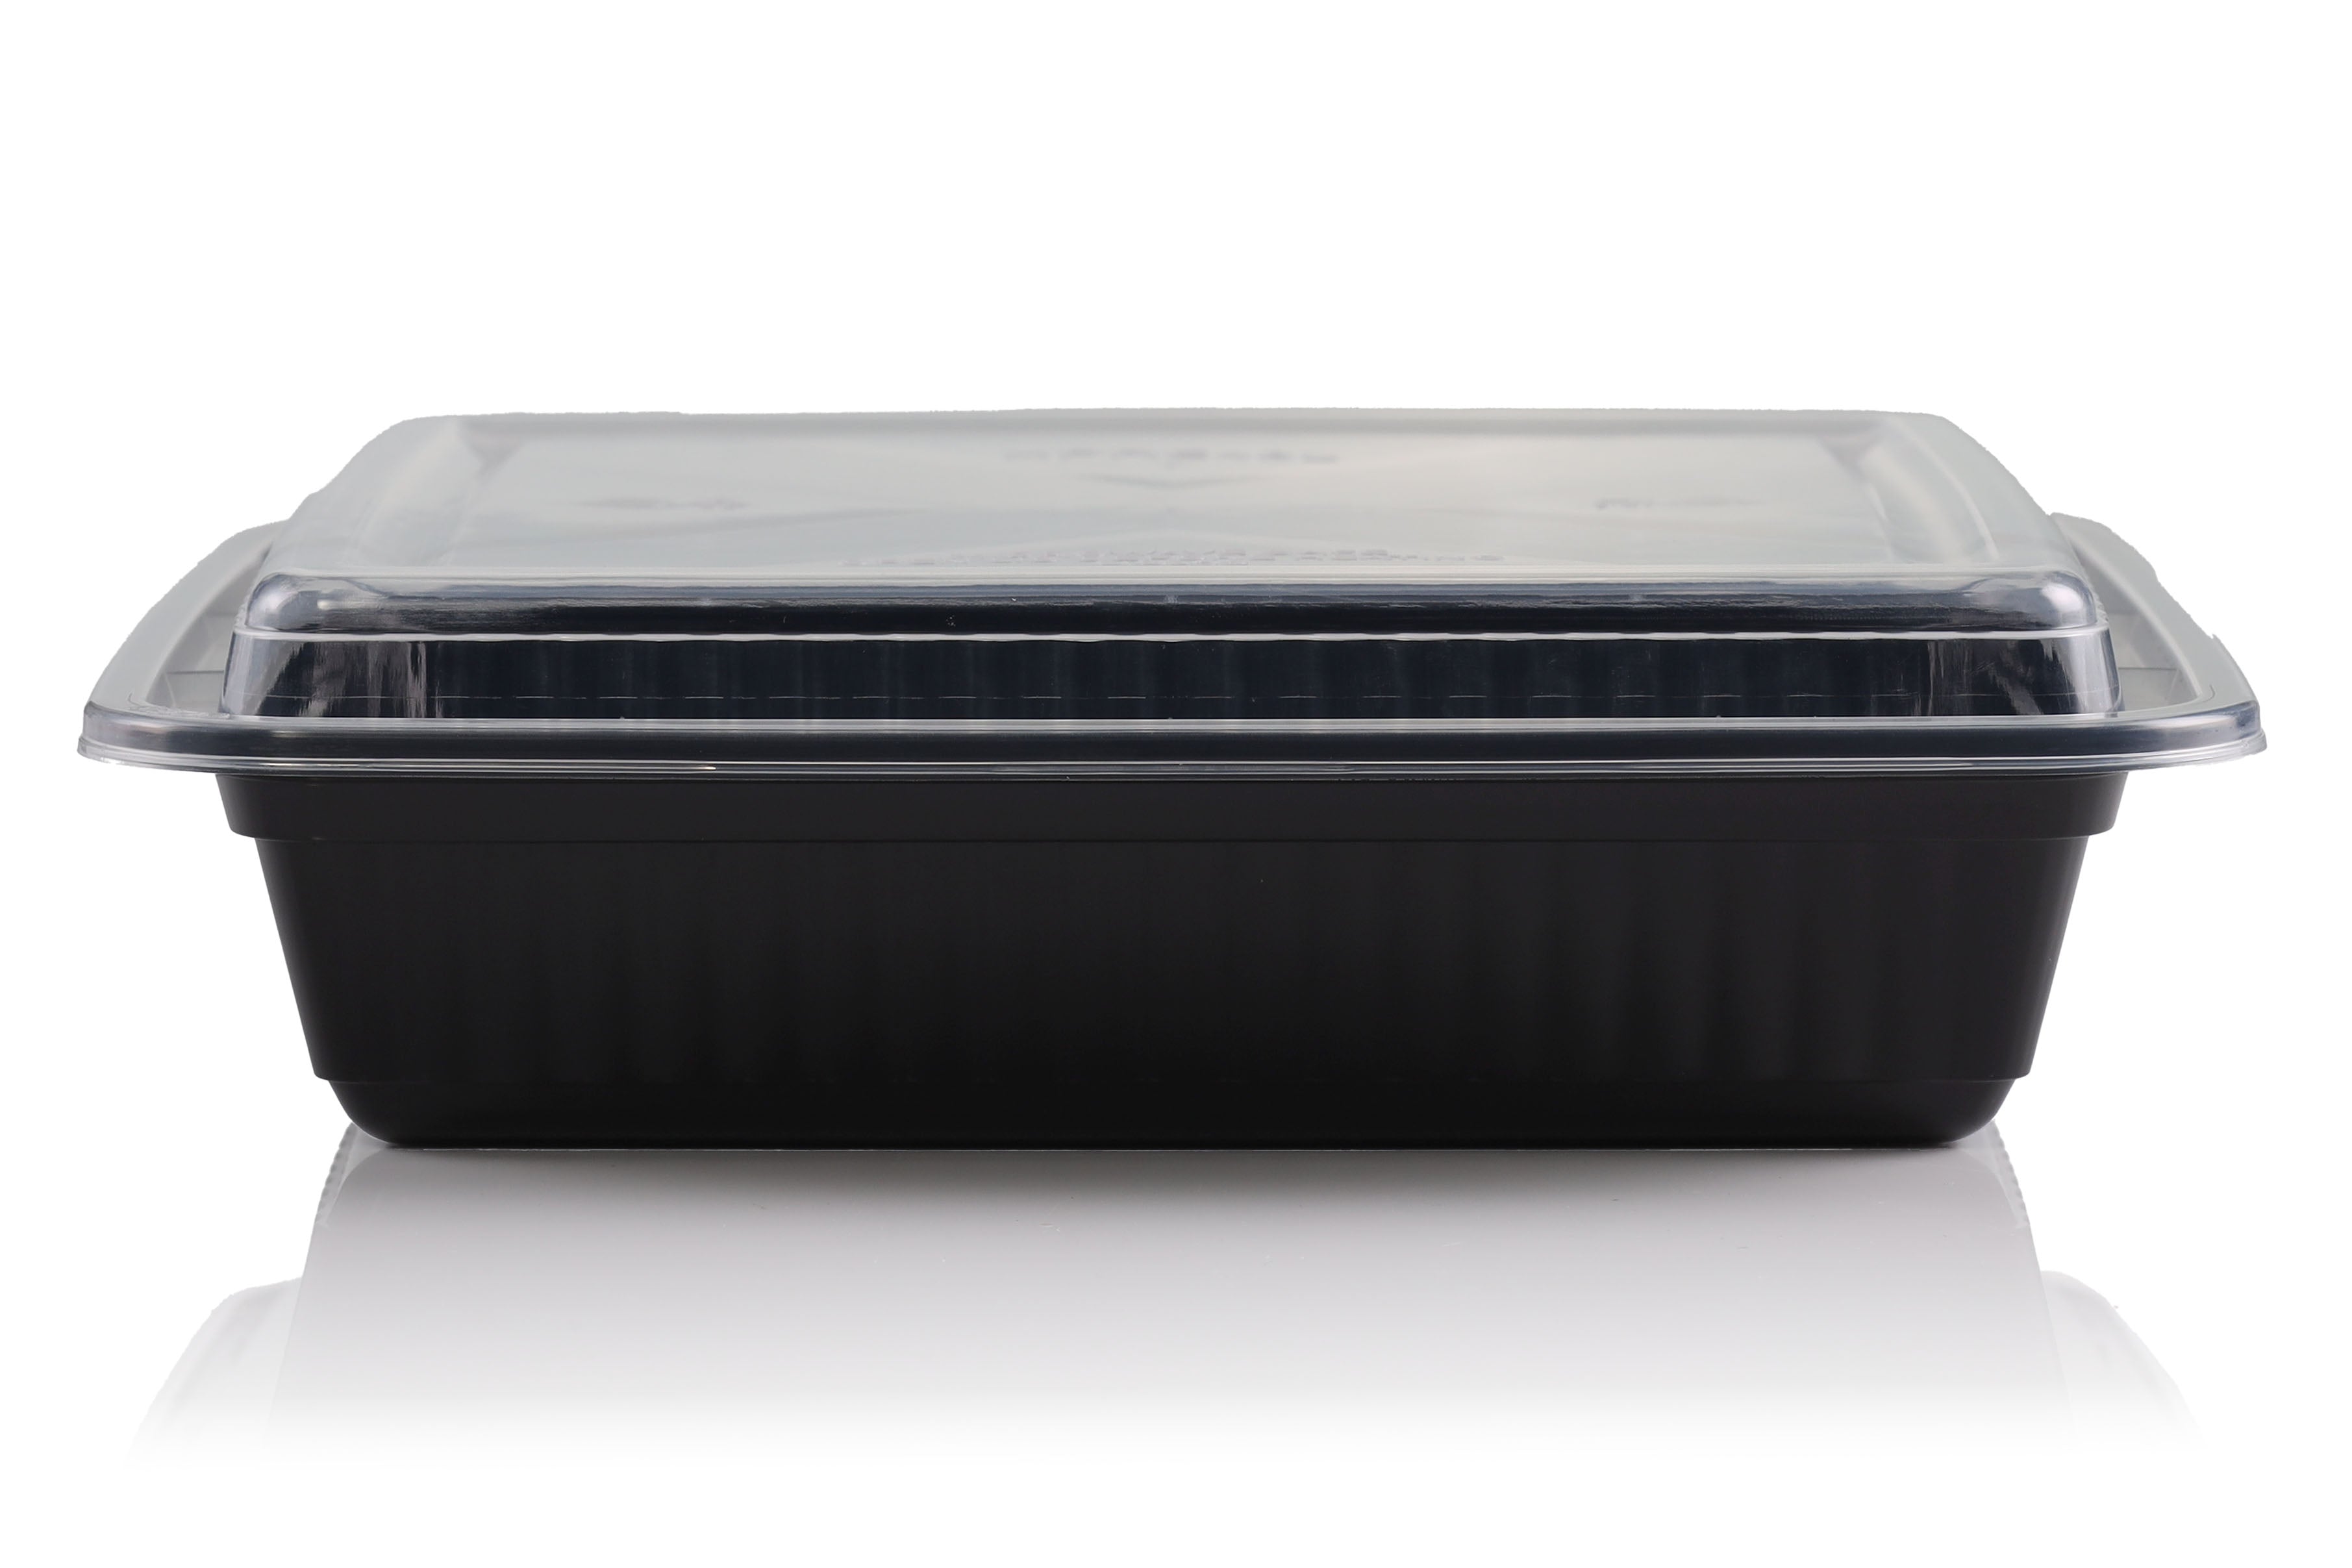 33oz Meal Prep Container (Single Compartment) Pack 50